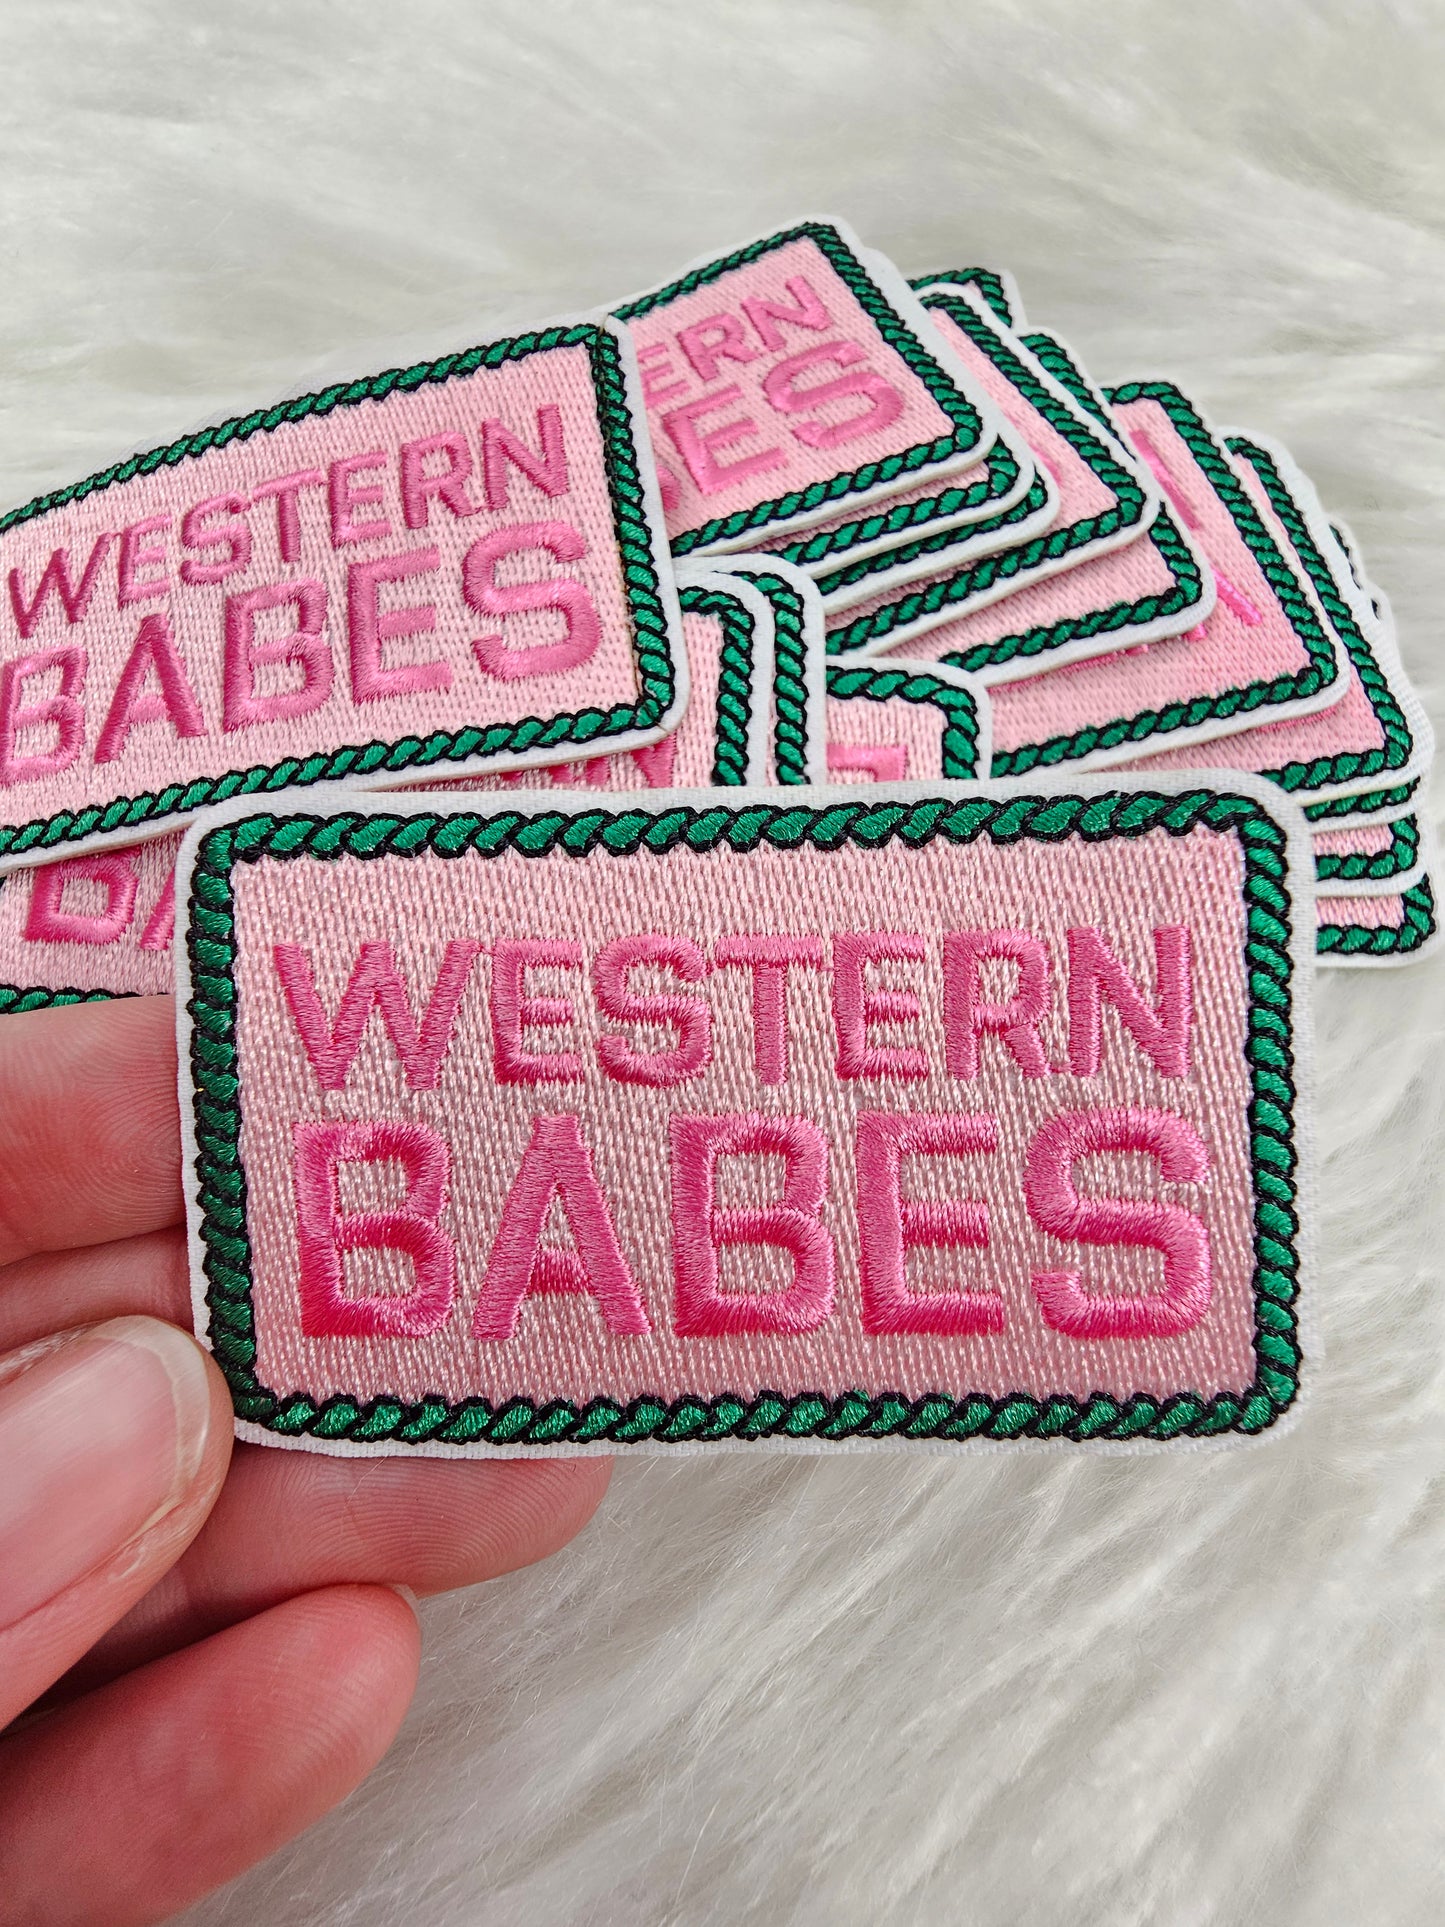 'Western Babes' Rope Pink and Green Embroidery Iron On Patch